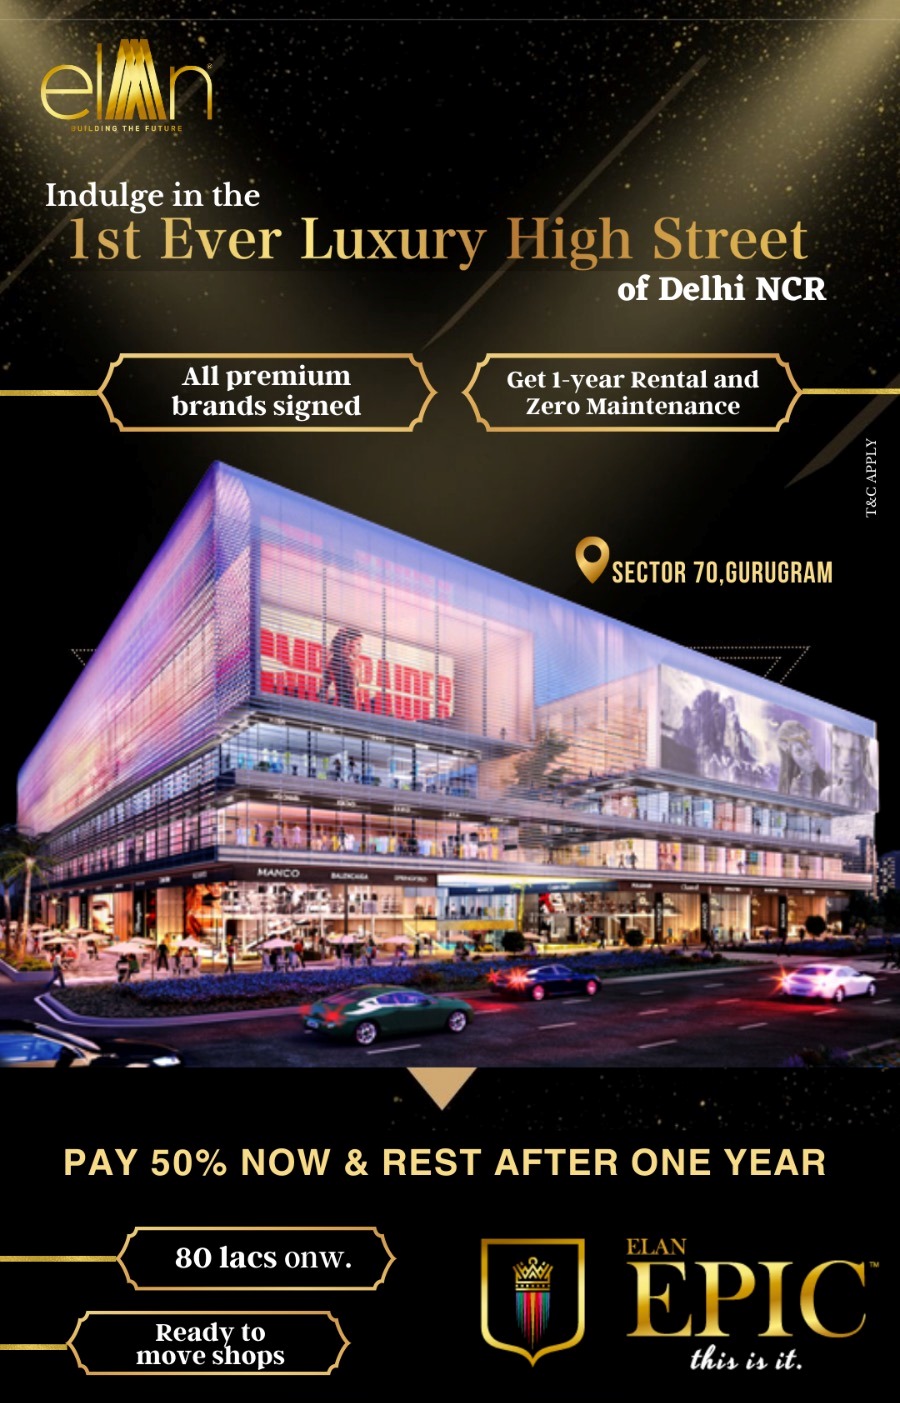 Pay 50% now and rest after one year at Elan Epic in Sector 70, Gurgaon Update